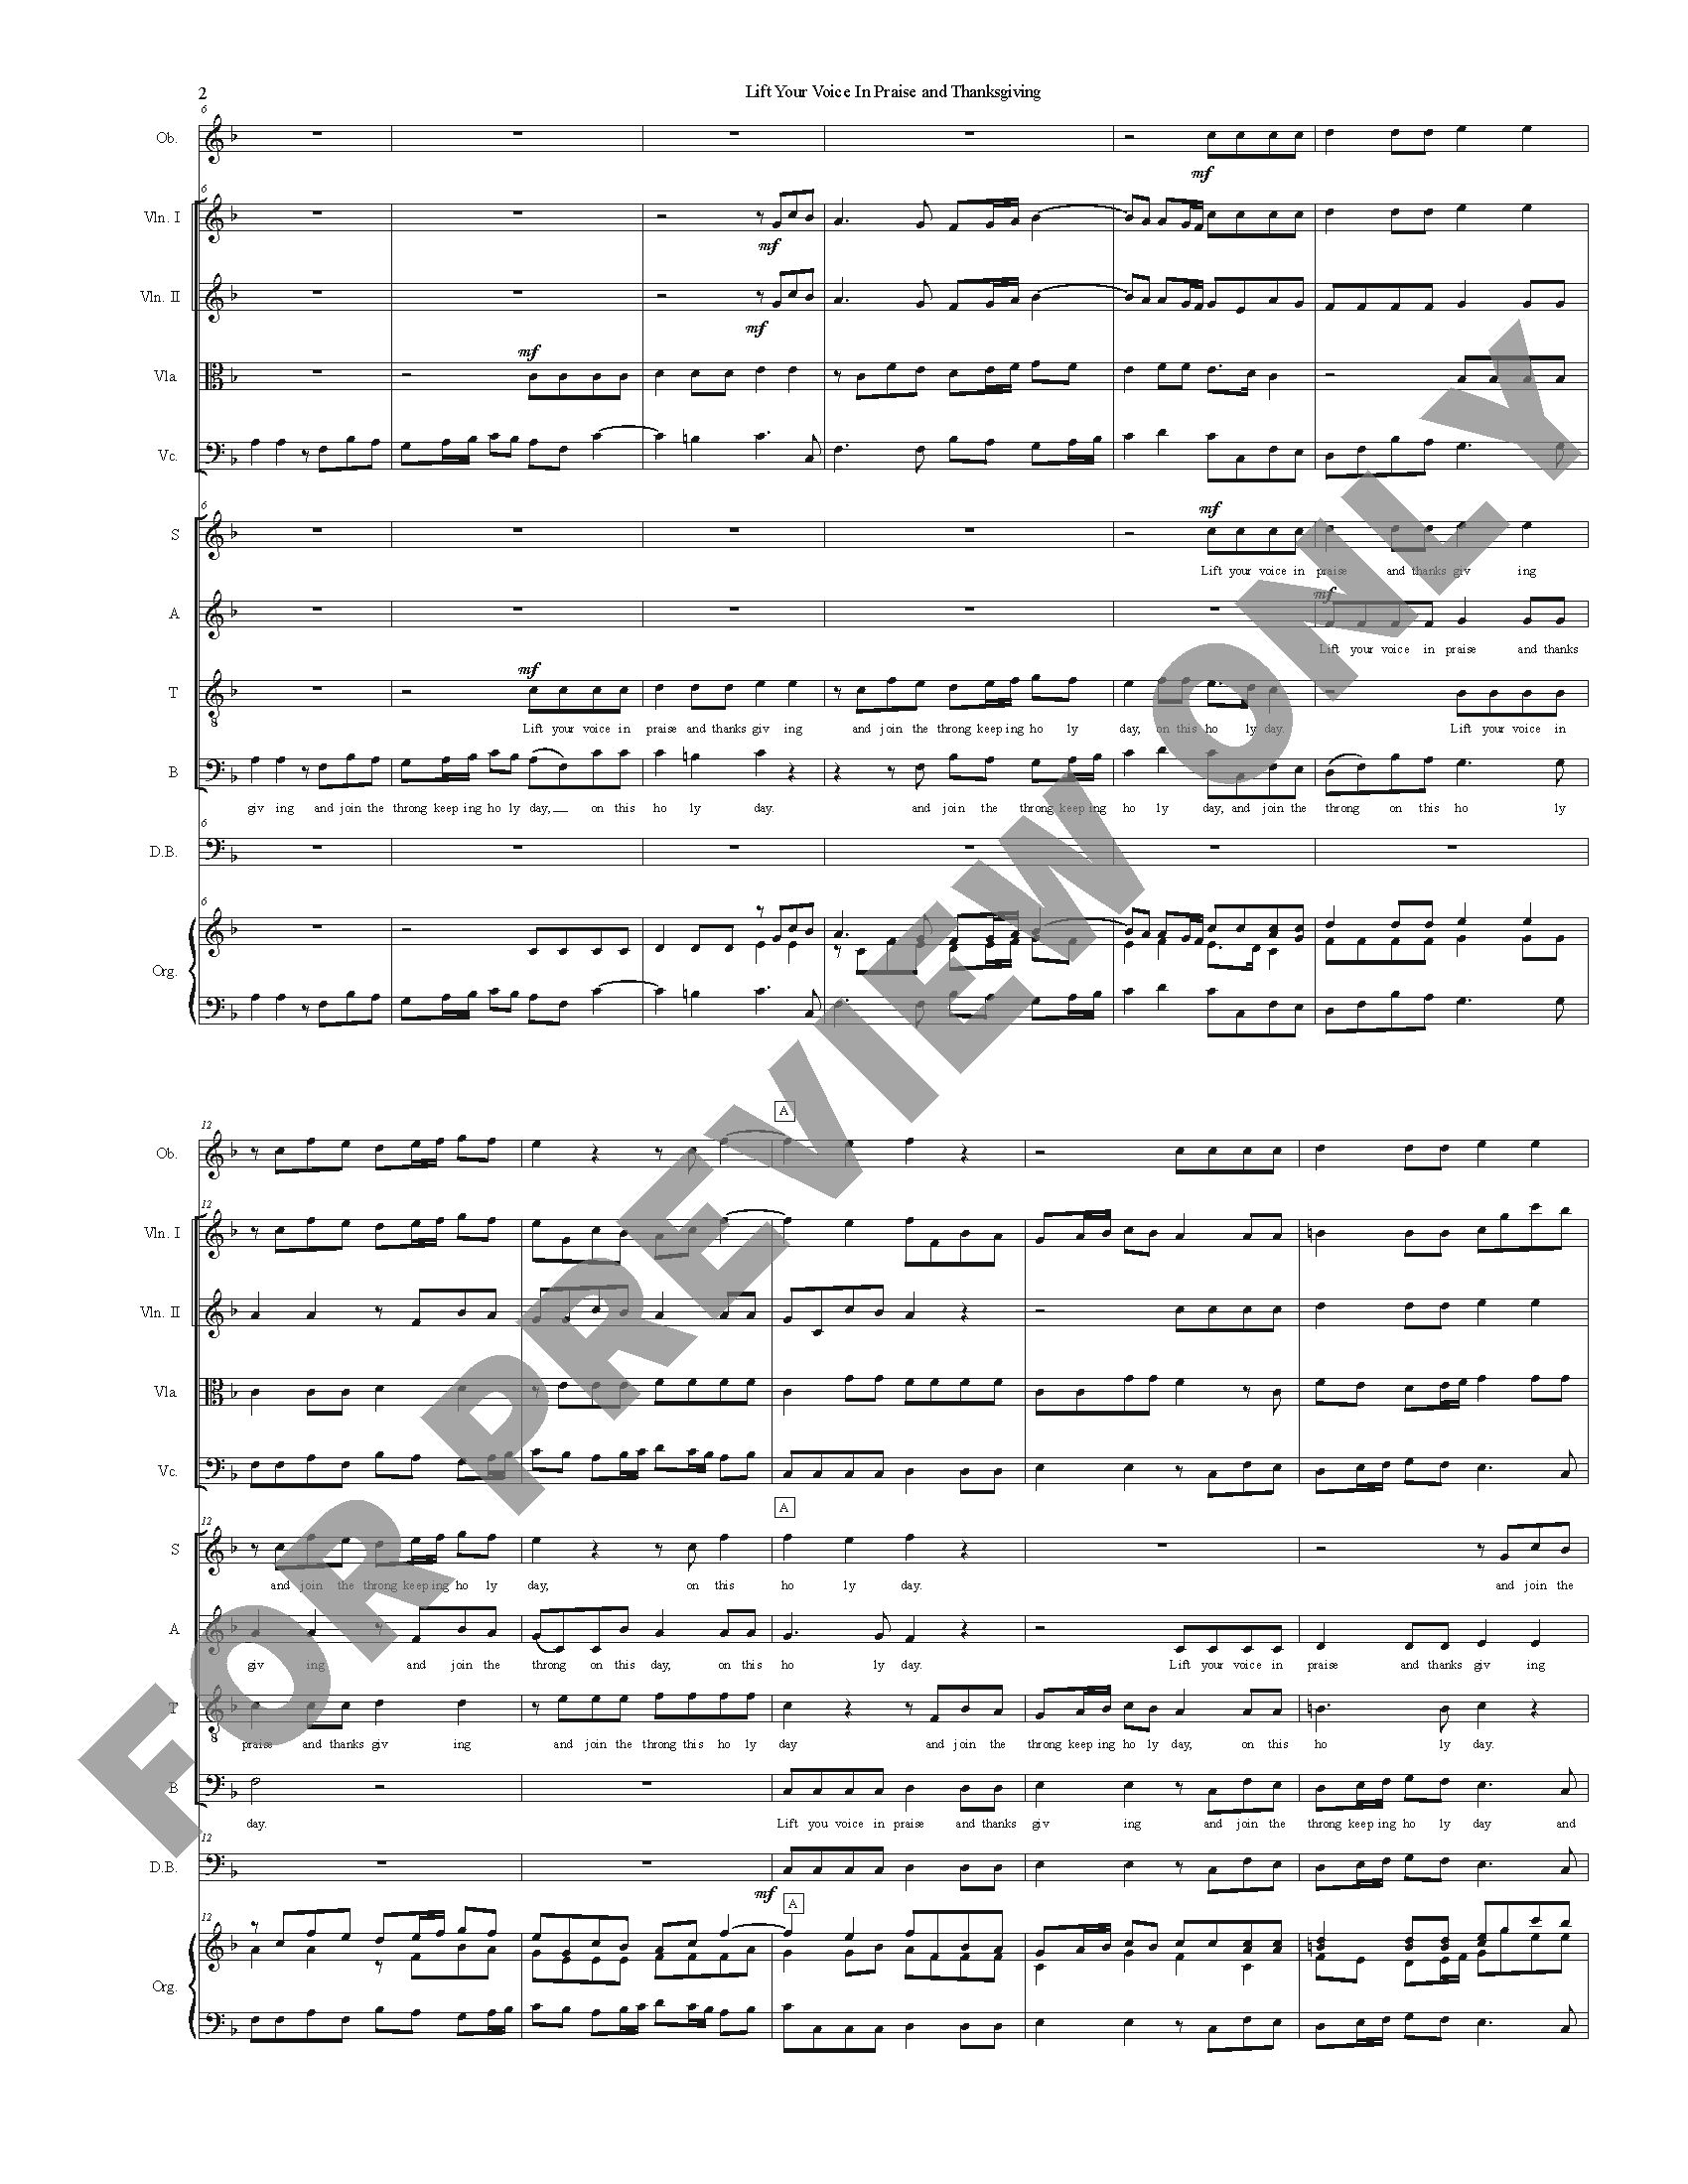 lift-your-voice-score_perusal_Page_08